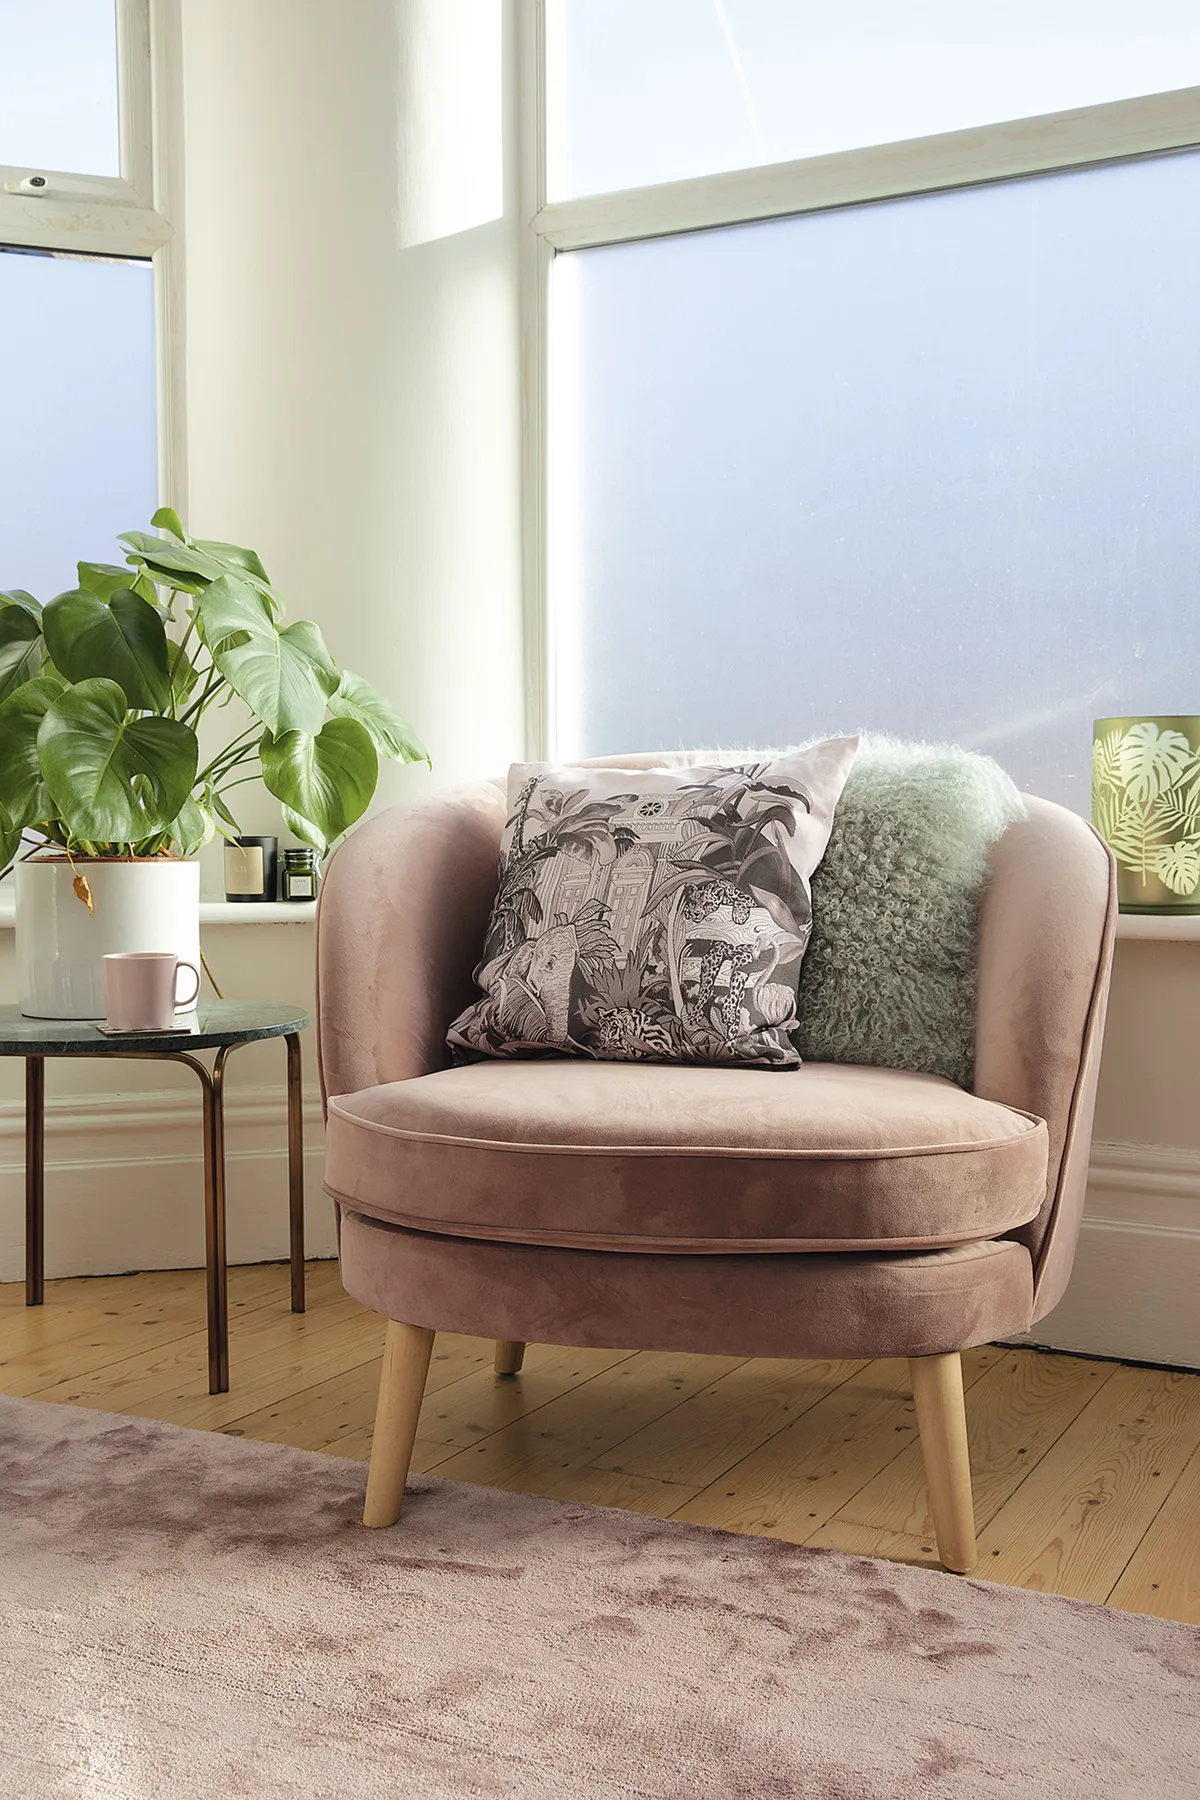 ‘For privacy, we’ve added frosted- effect window adhesive in the living room. It’s the perfect spot for my pink MADE.com chair, and the monochrome cushion from The Wild Kind London’